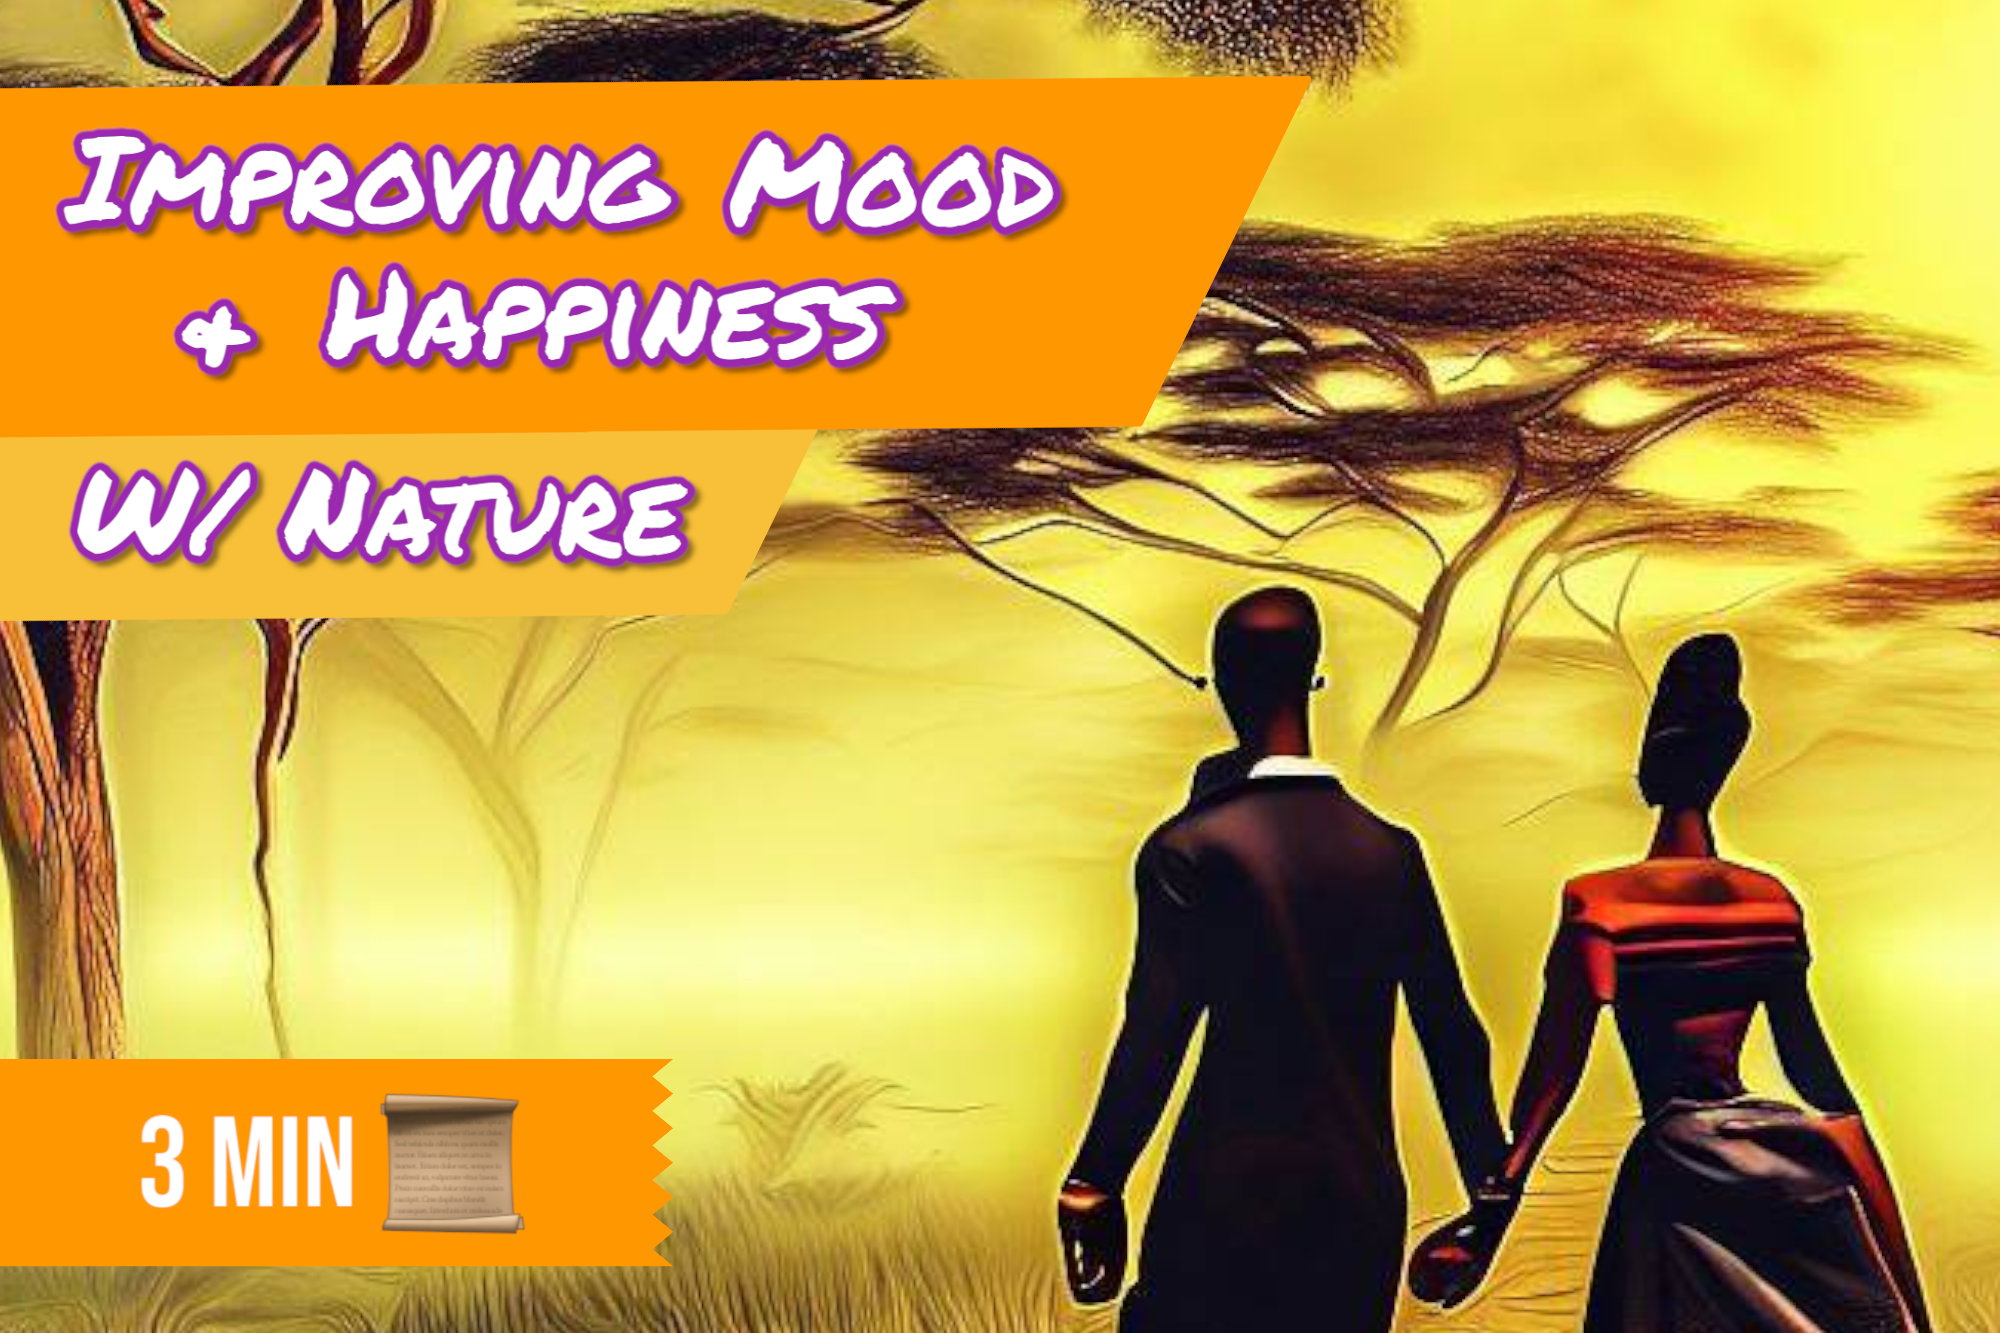 Improving Mood and Happiness with Nature